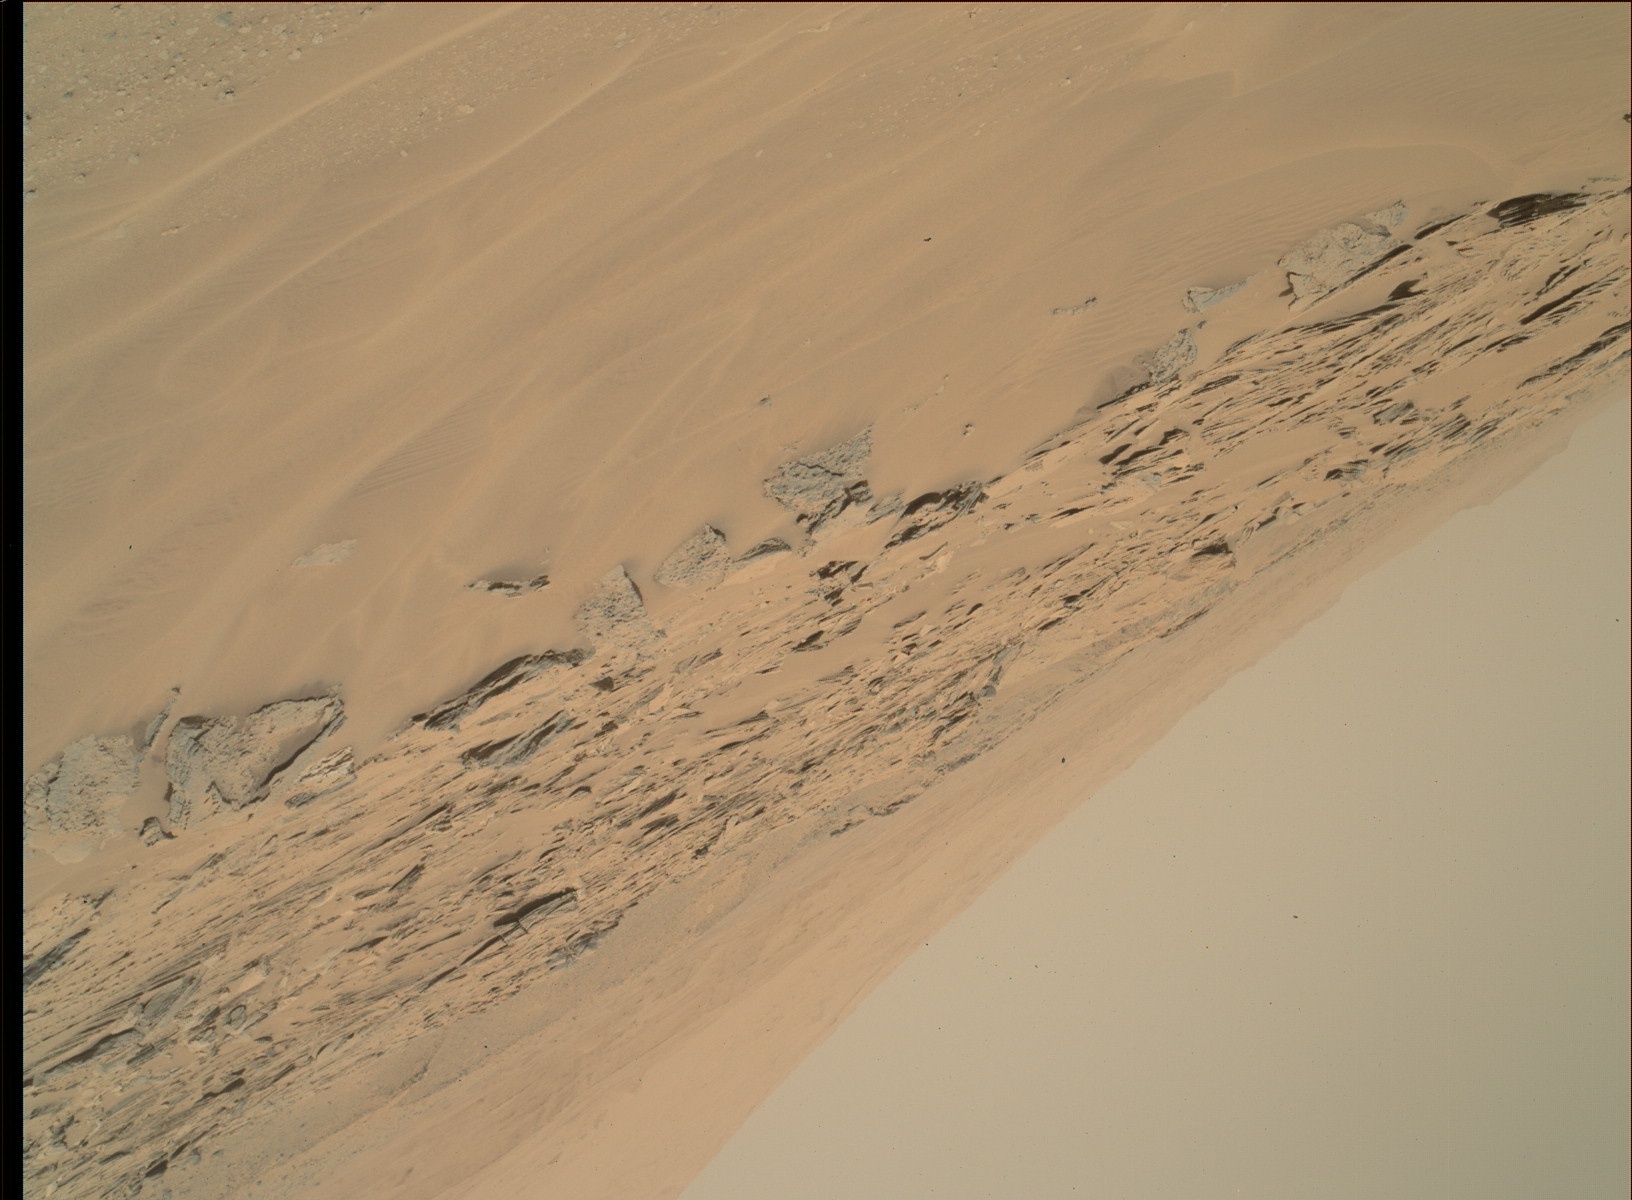 Nasa's Mars rover Curiosity acquired this image using its Mars Hand Lens Imager (MAHLI) on Sol 747